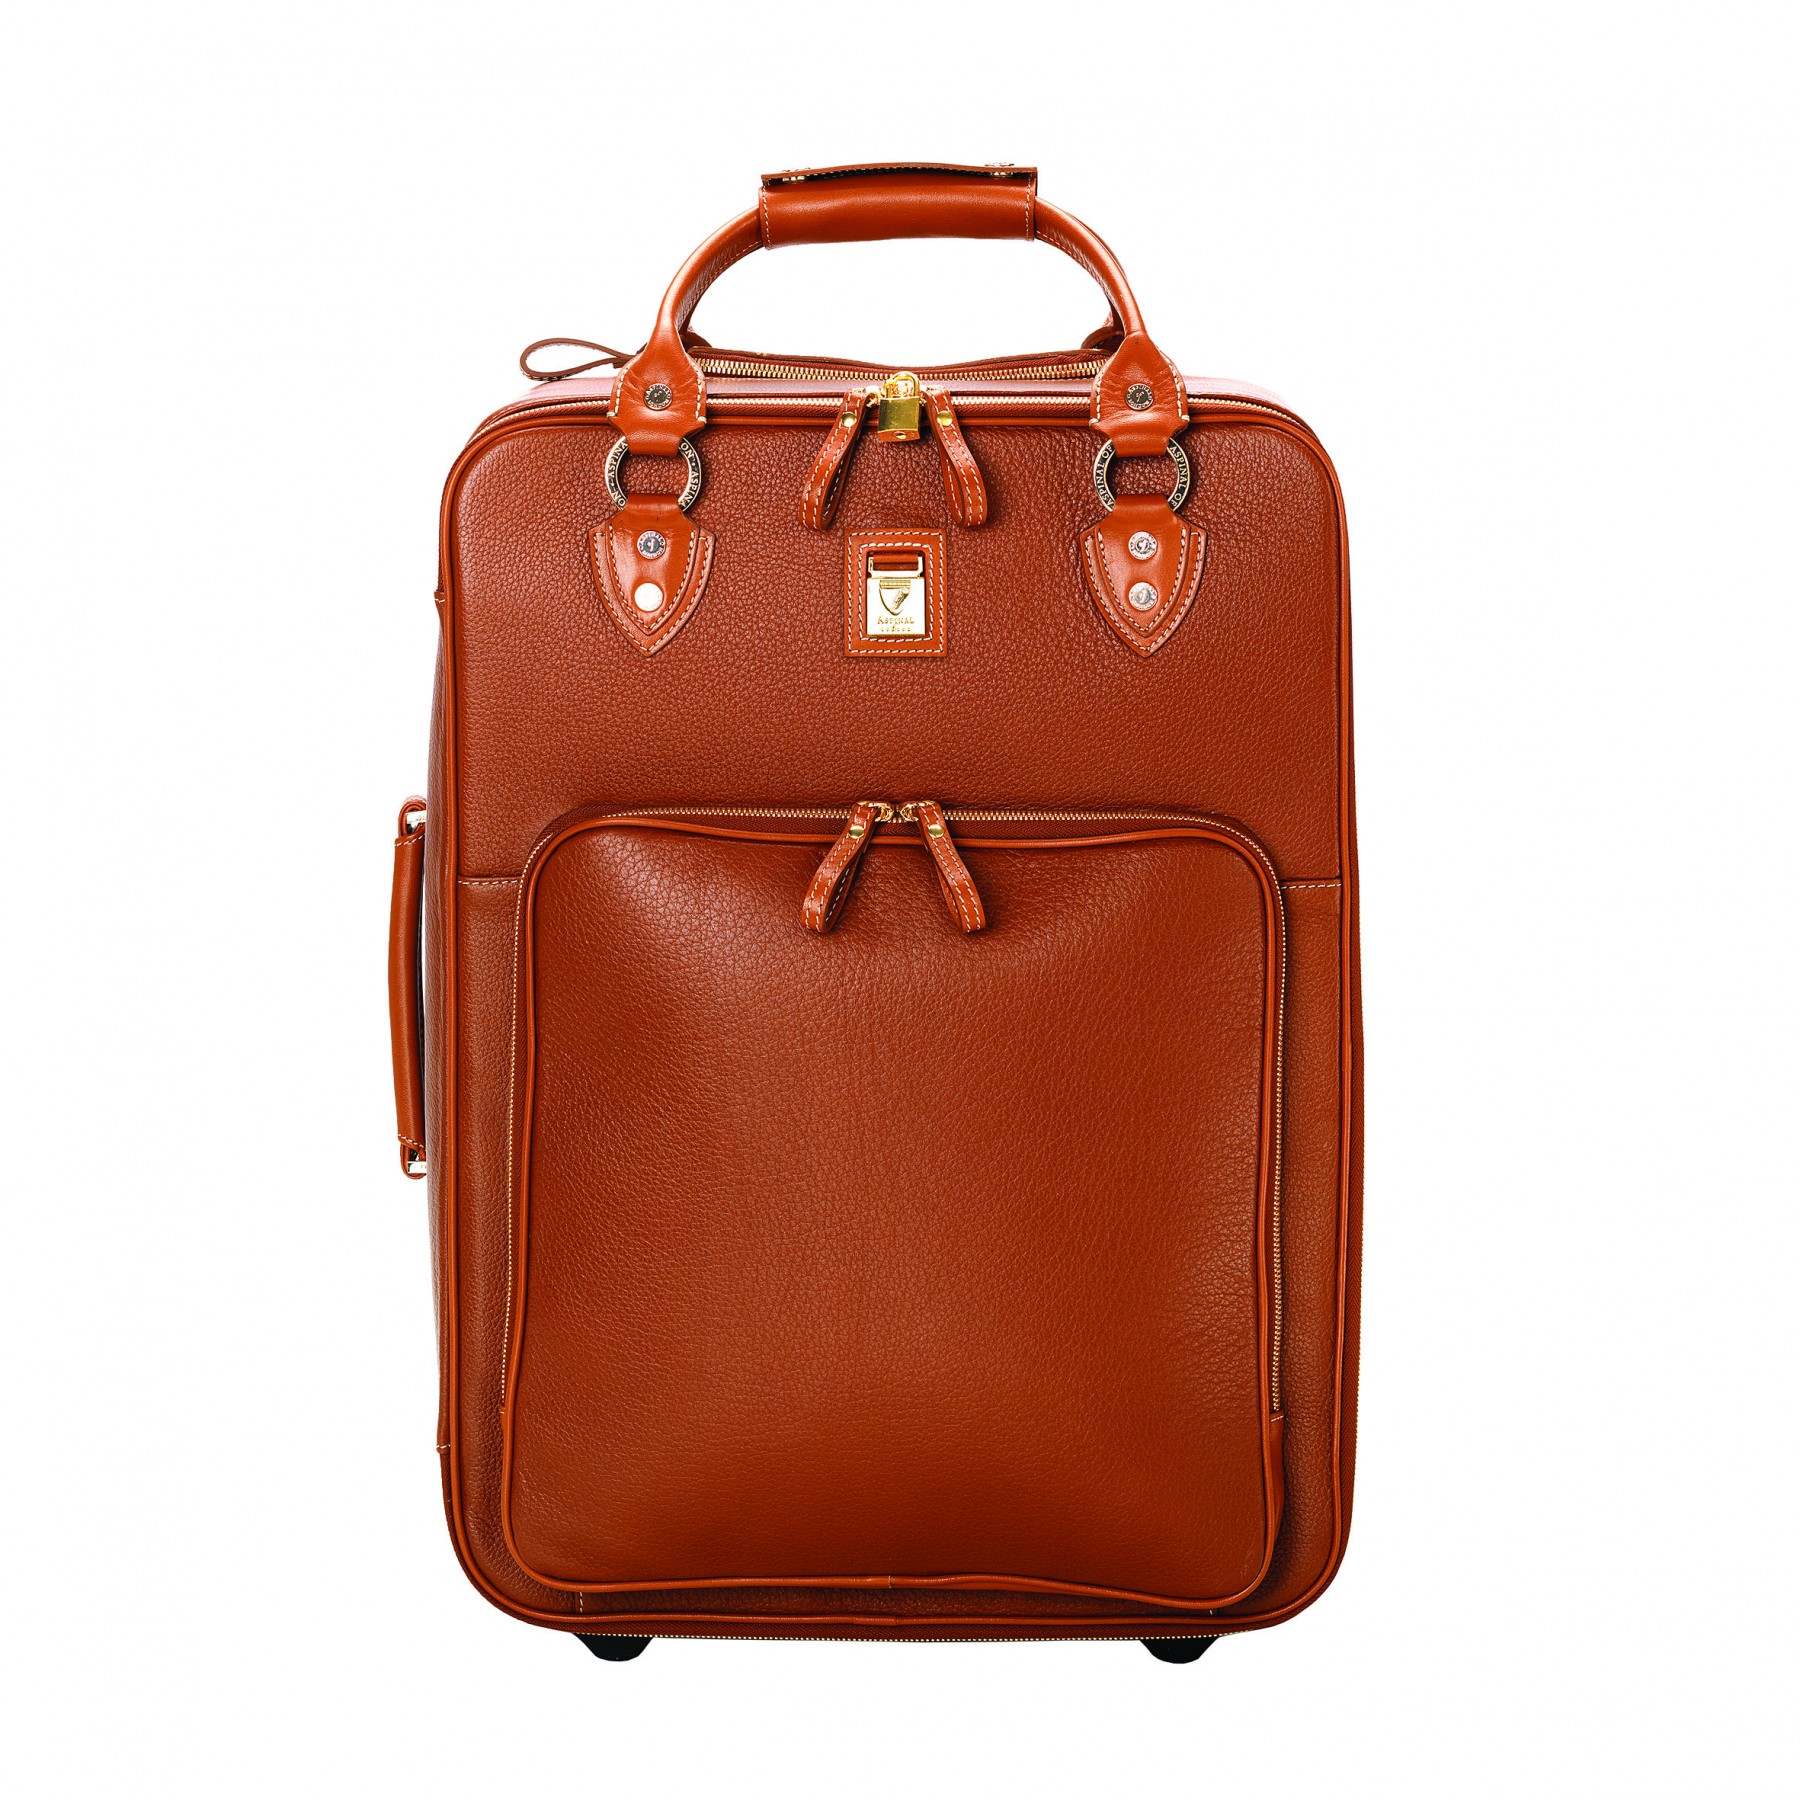 Travel In Style | Top 10 Luxury Luggage Bags | Hero and Leander